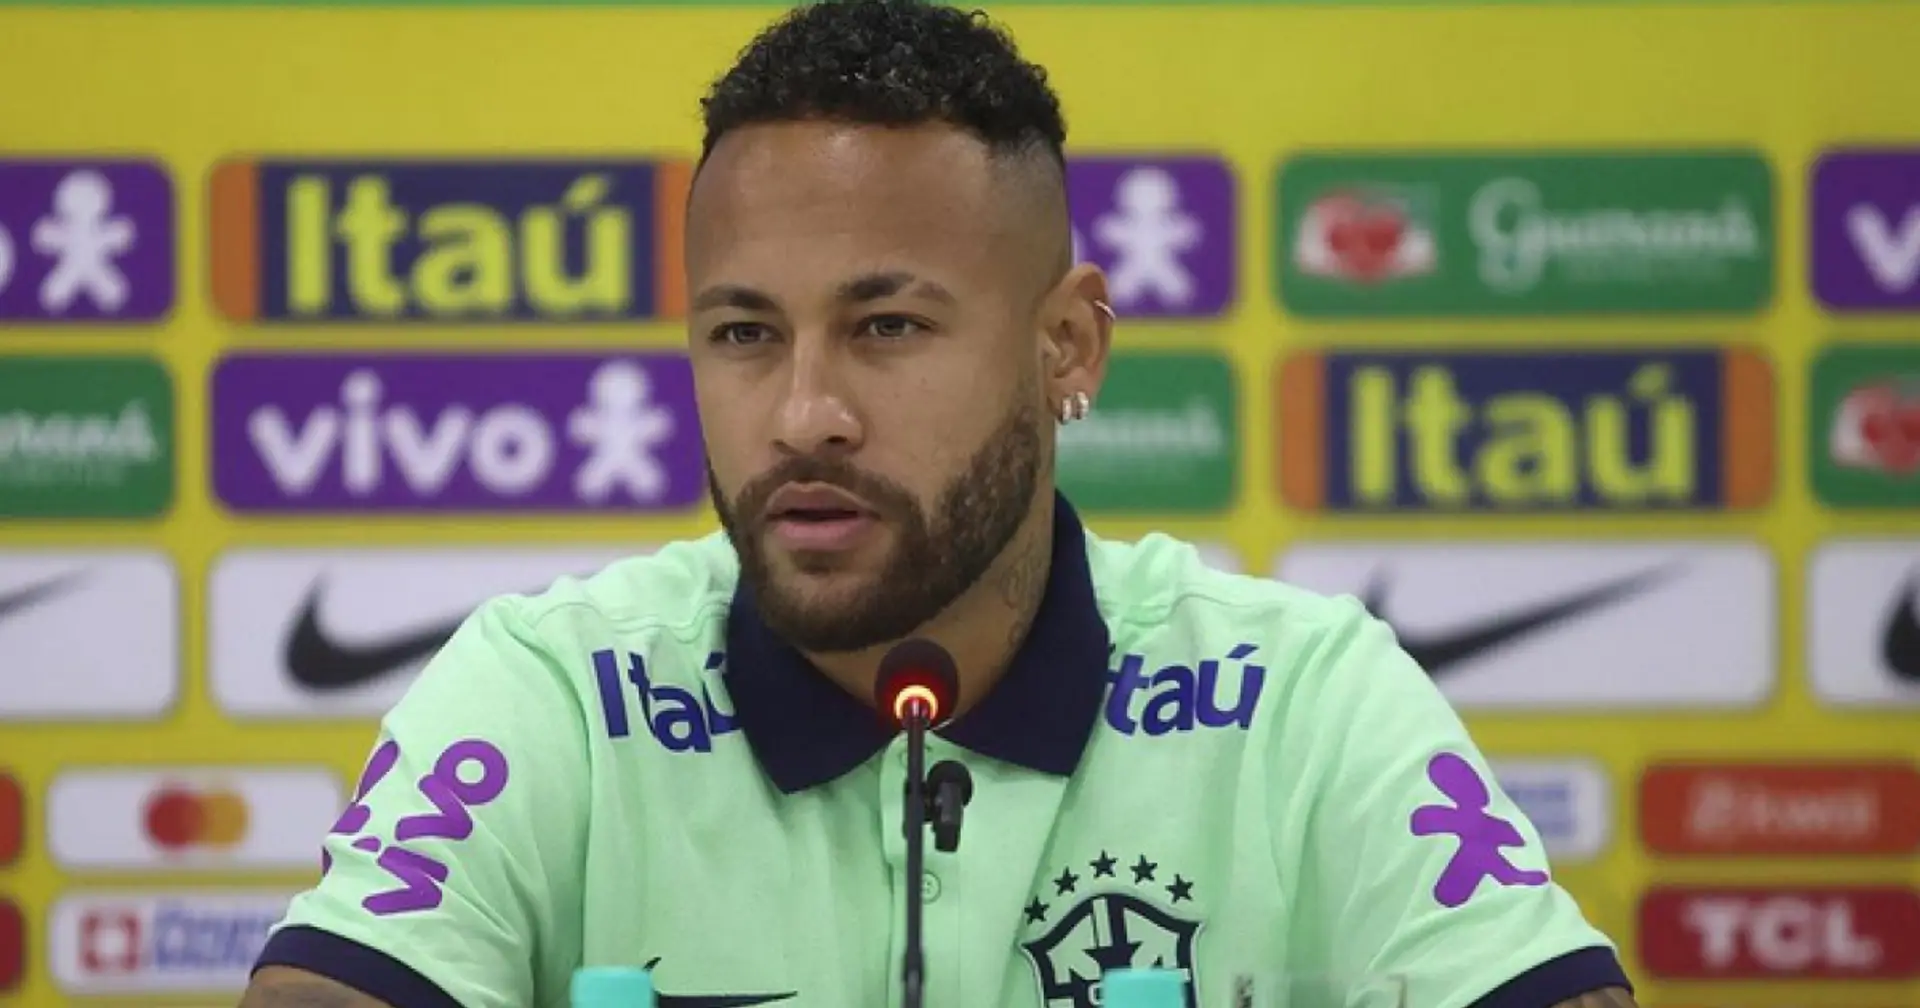 'It's a lie. Stop this': Neymar cries out on social media over outrageous accusation